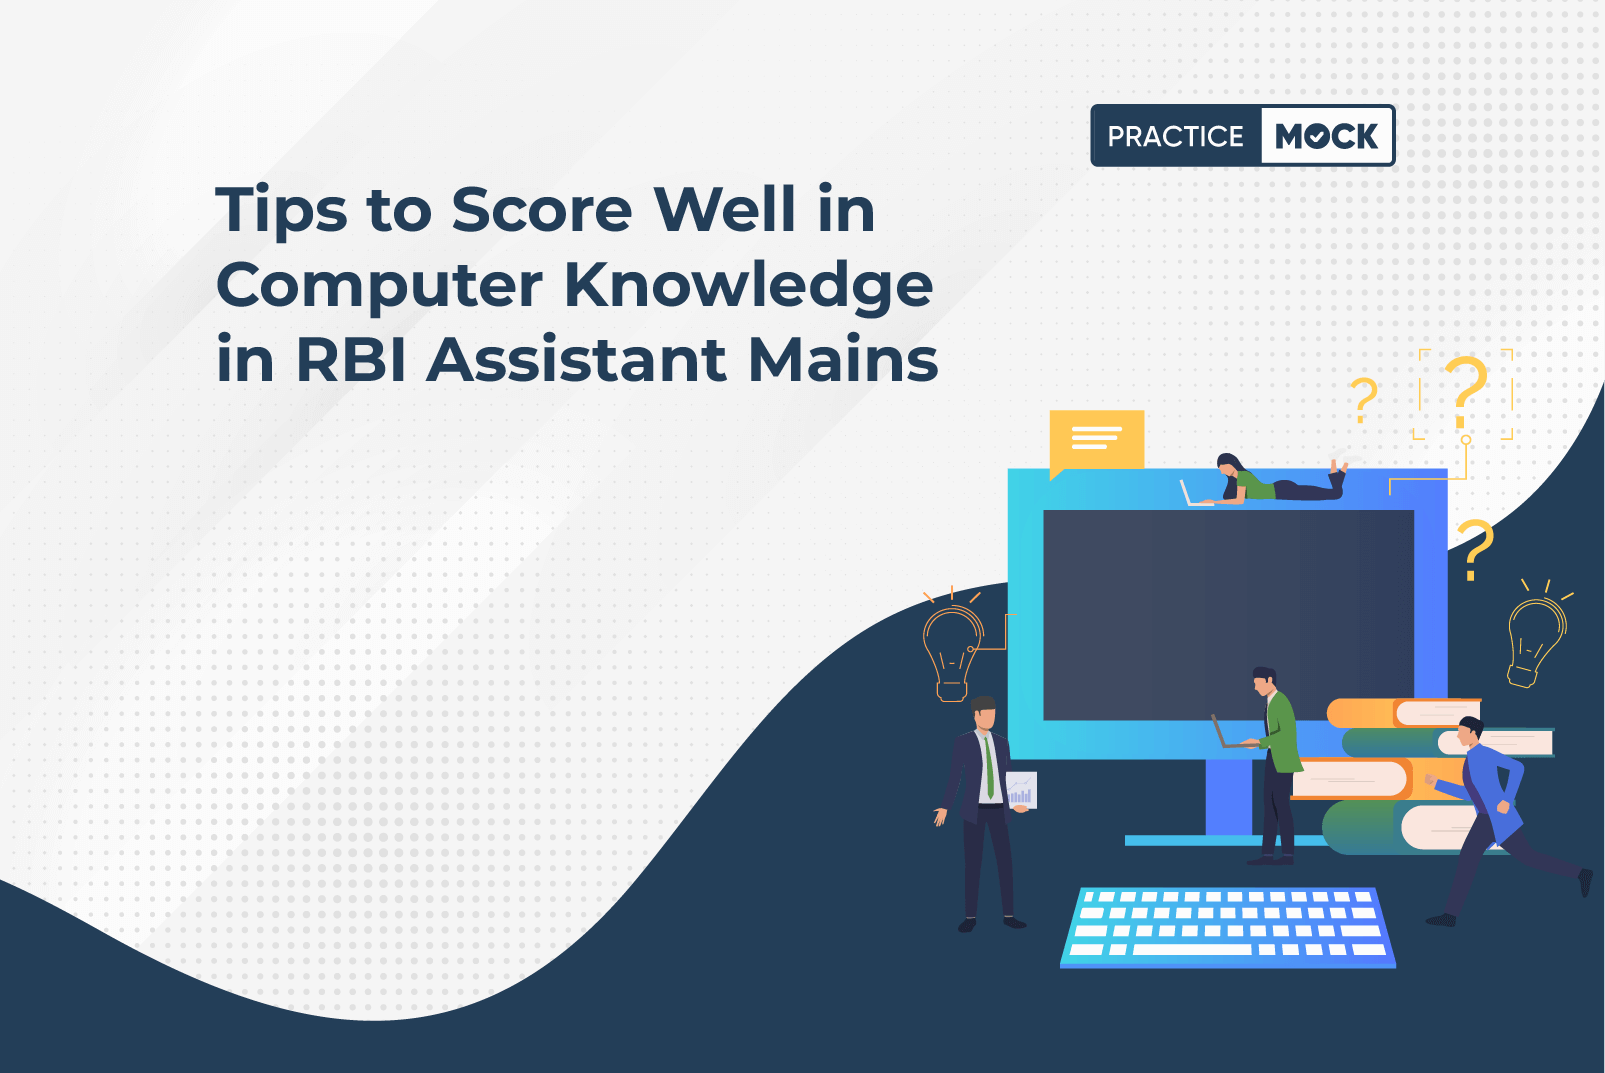 Tips to Score Well in Computer Knowledge in RBI Assistant Mains